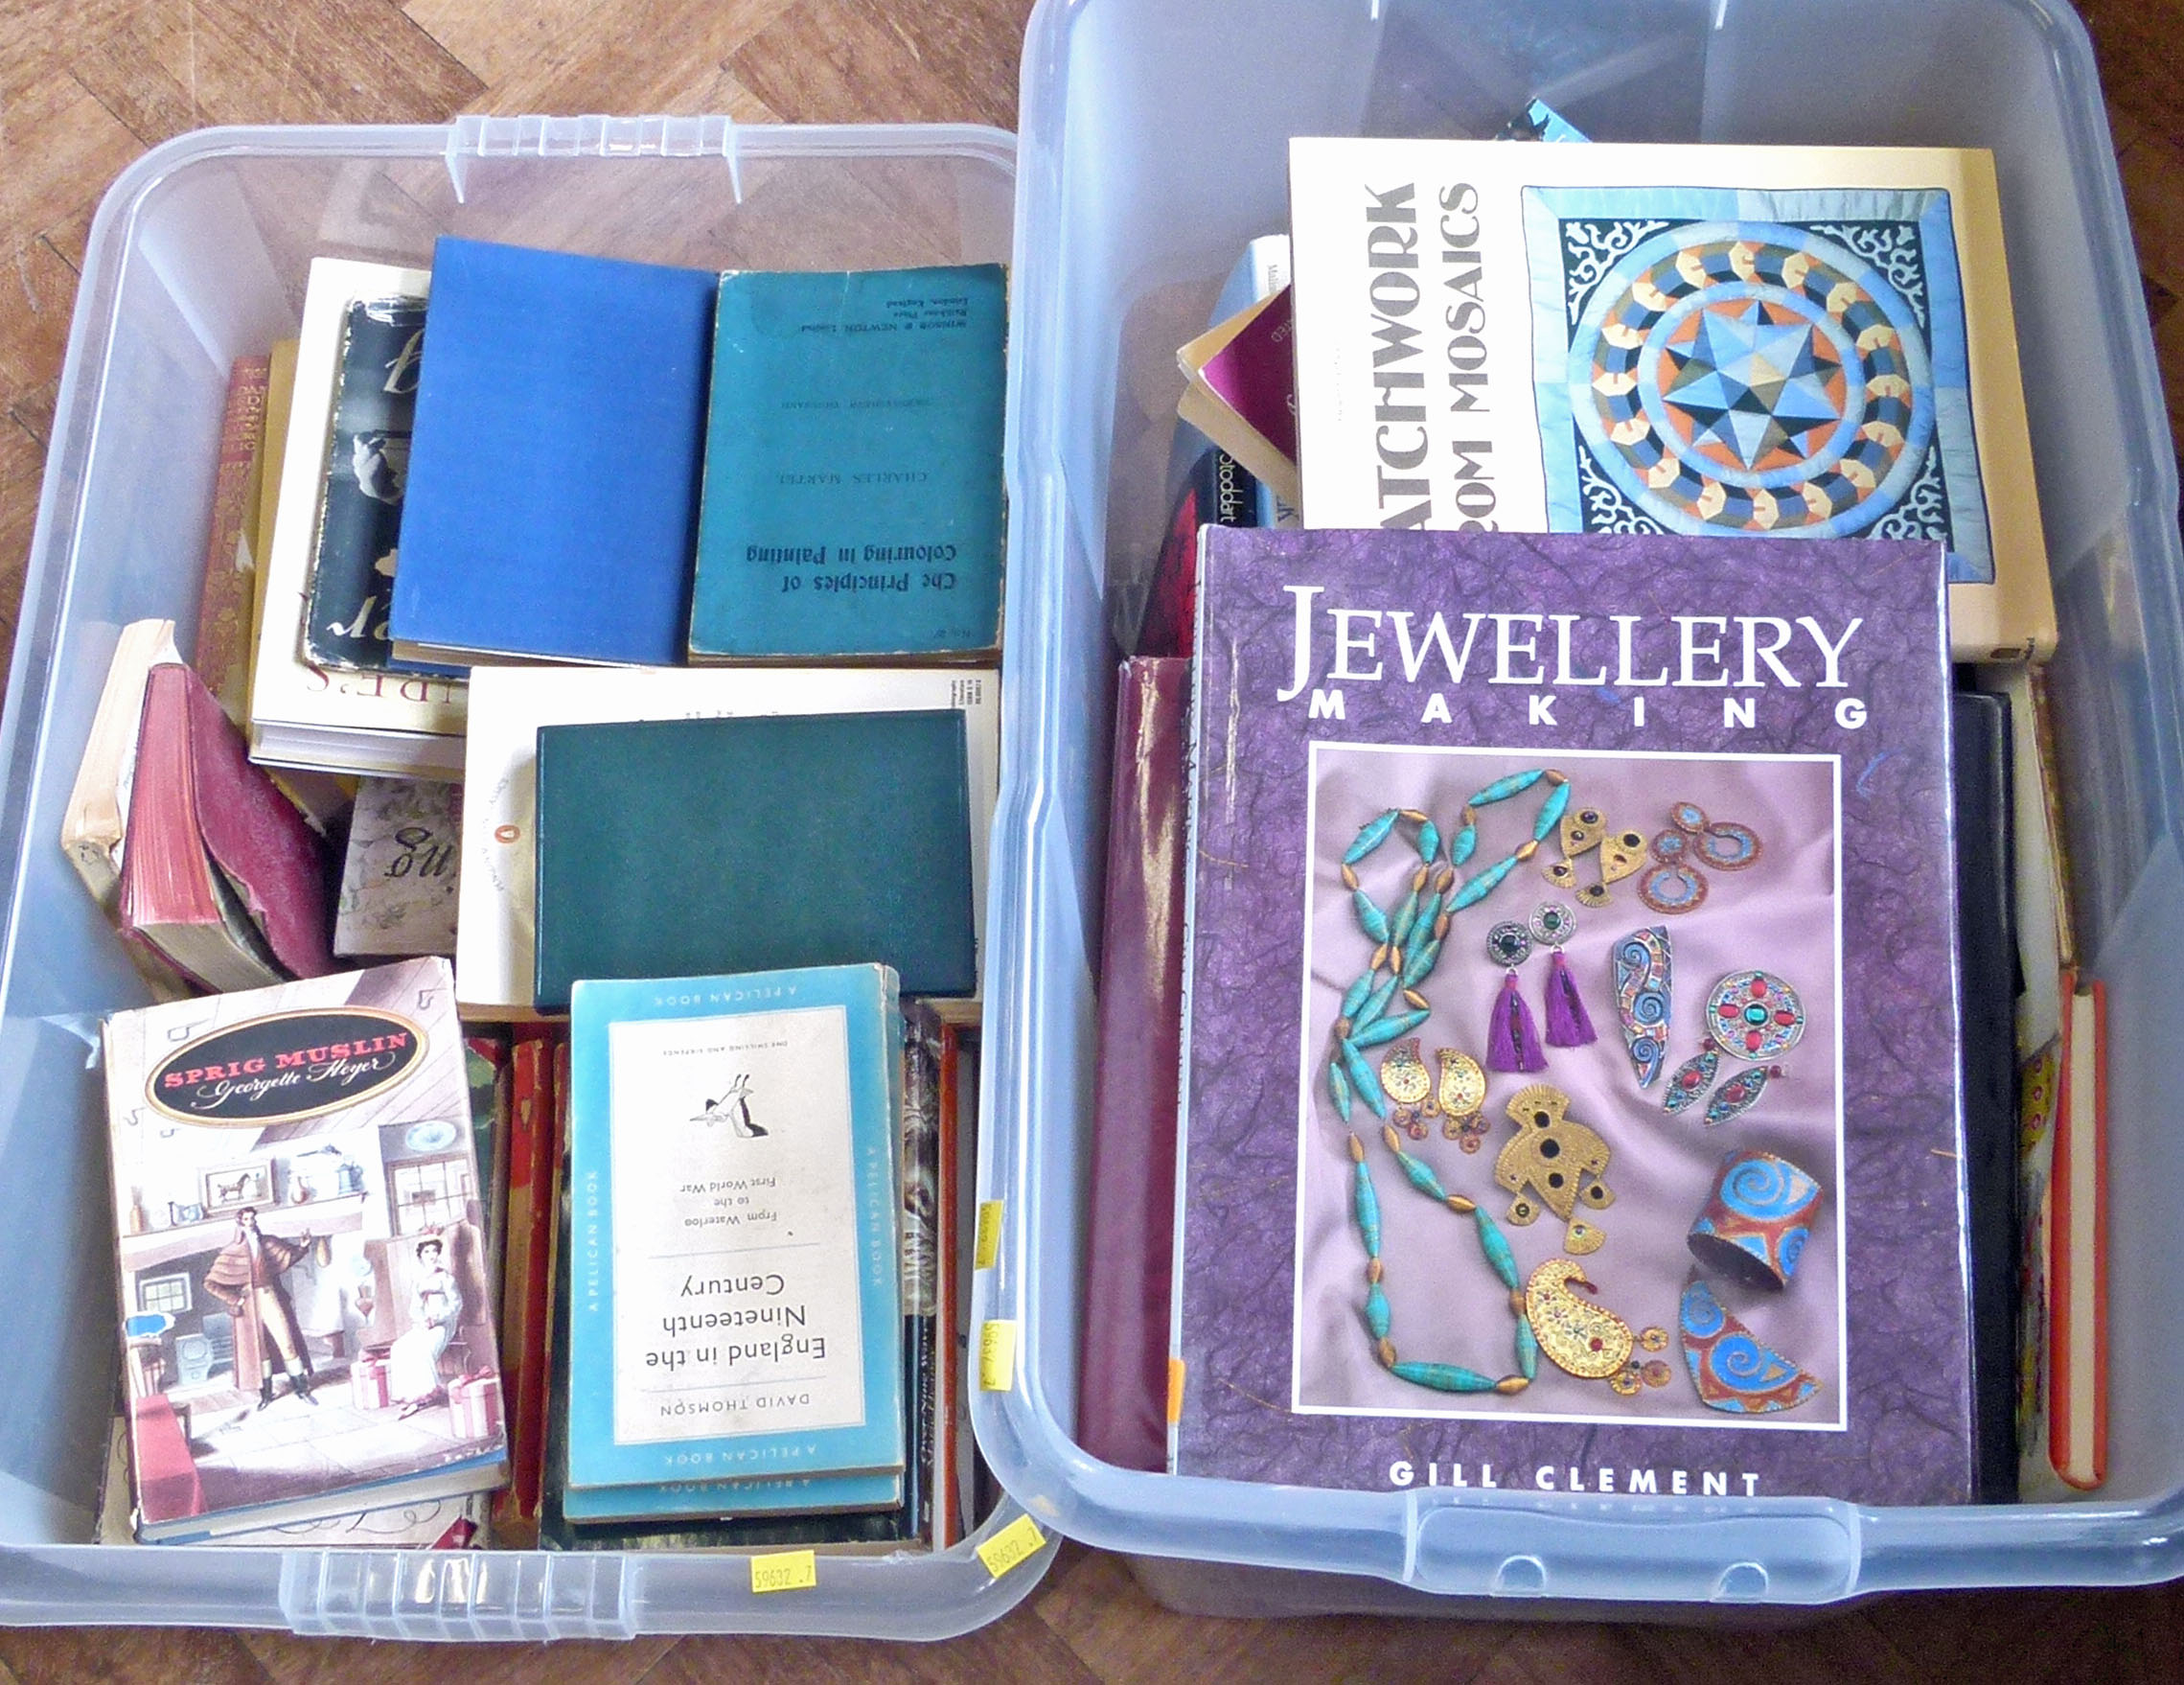 Two boxes of books, "Paris and Surrealists", "Country Christmas" "Jewellery Making" and various